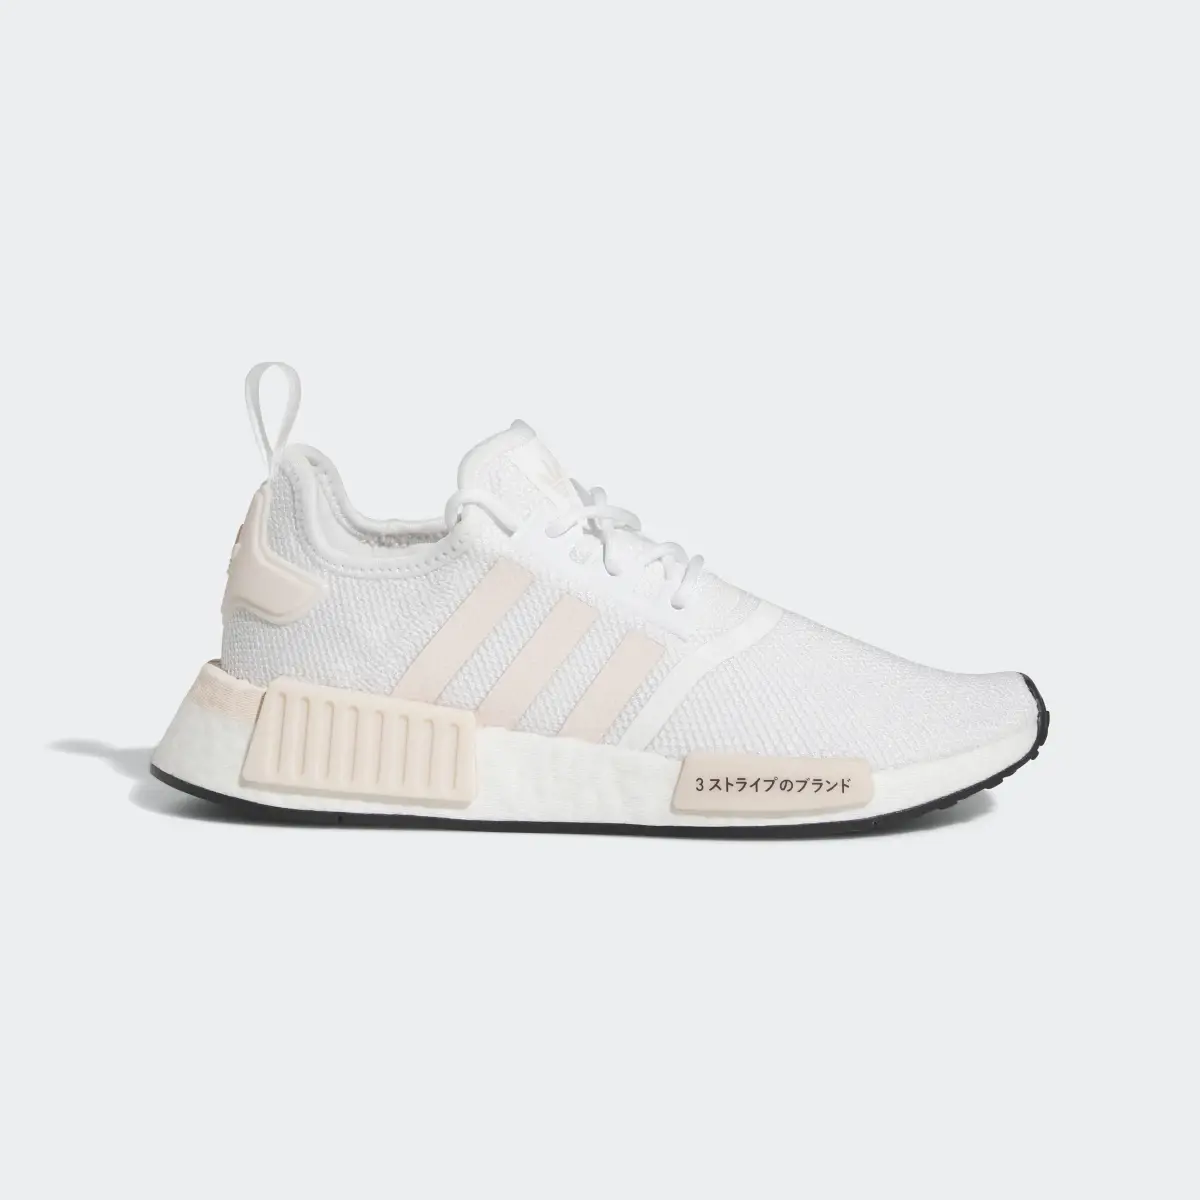 Adidas NMD_R1 Shoes. 2